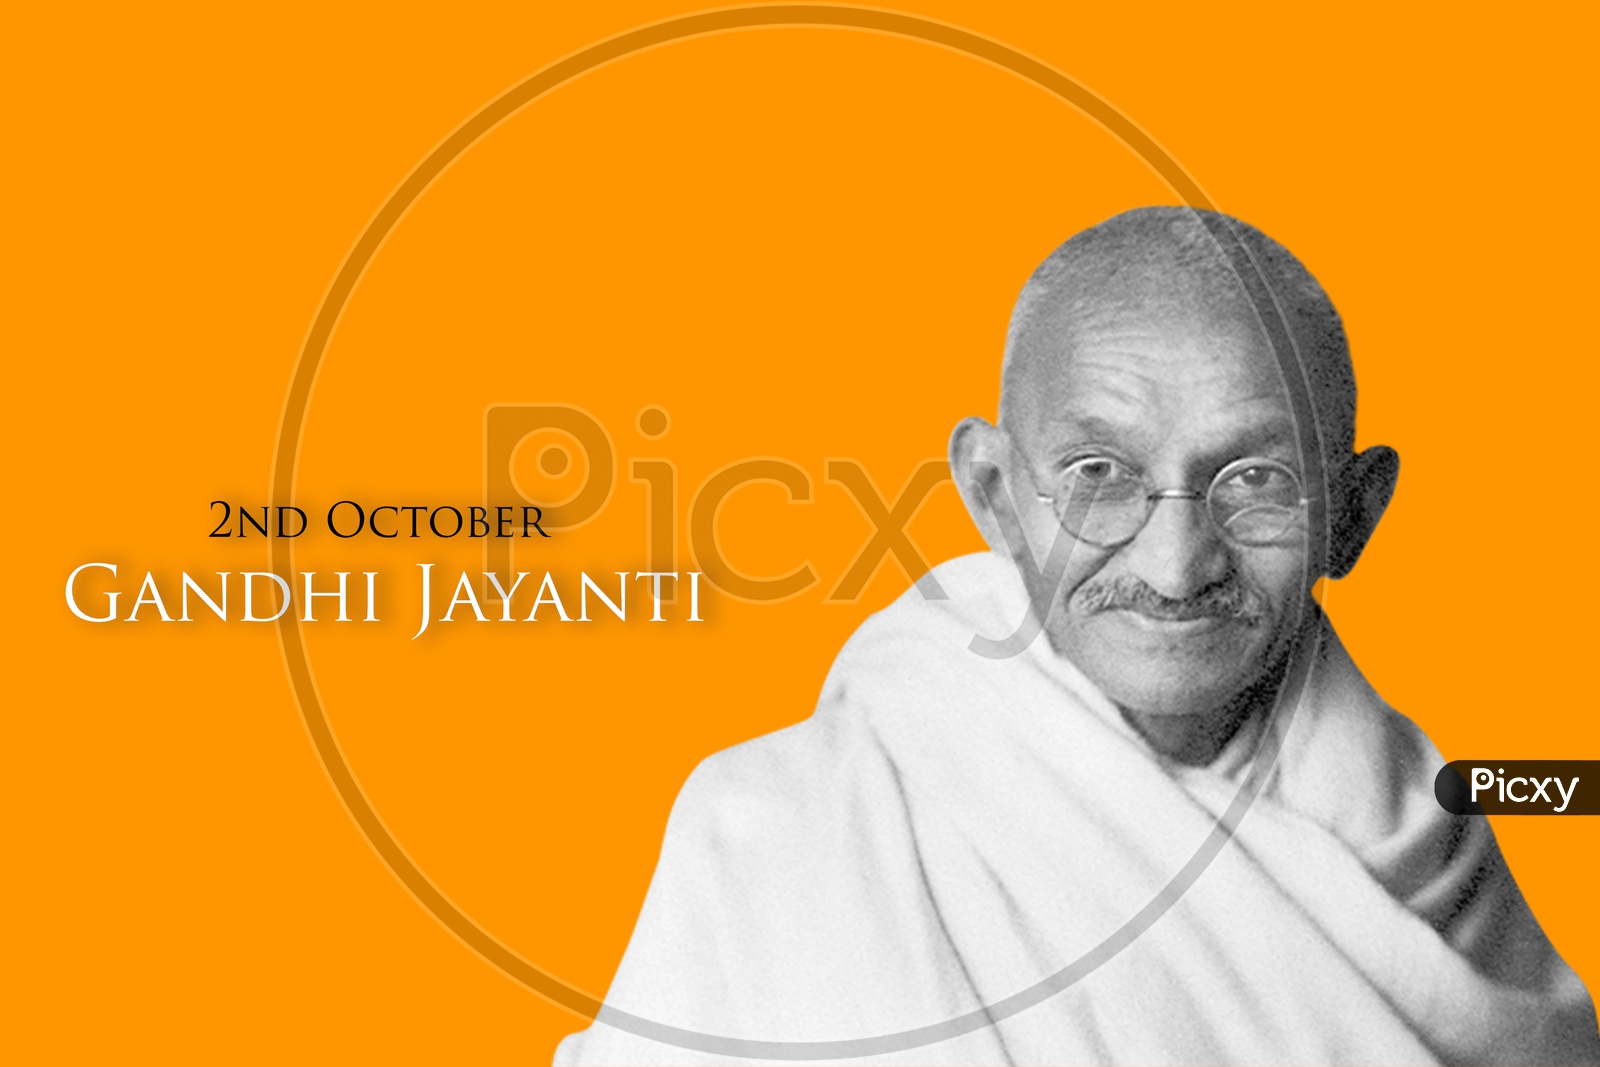 Gandhi Jayanti on 2nd October on the eve of father of the nation Mohandas Karamchand Gandhi Birthday in India